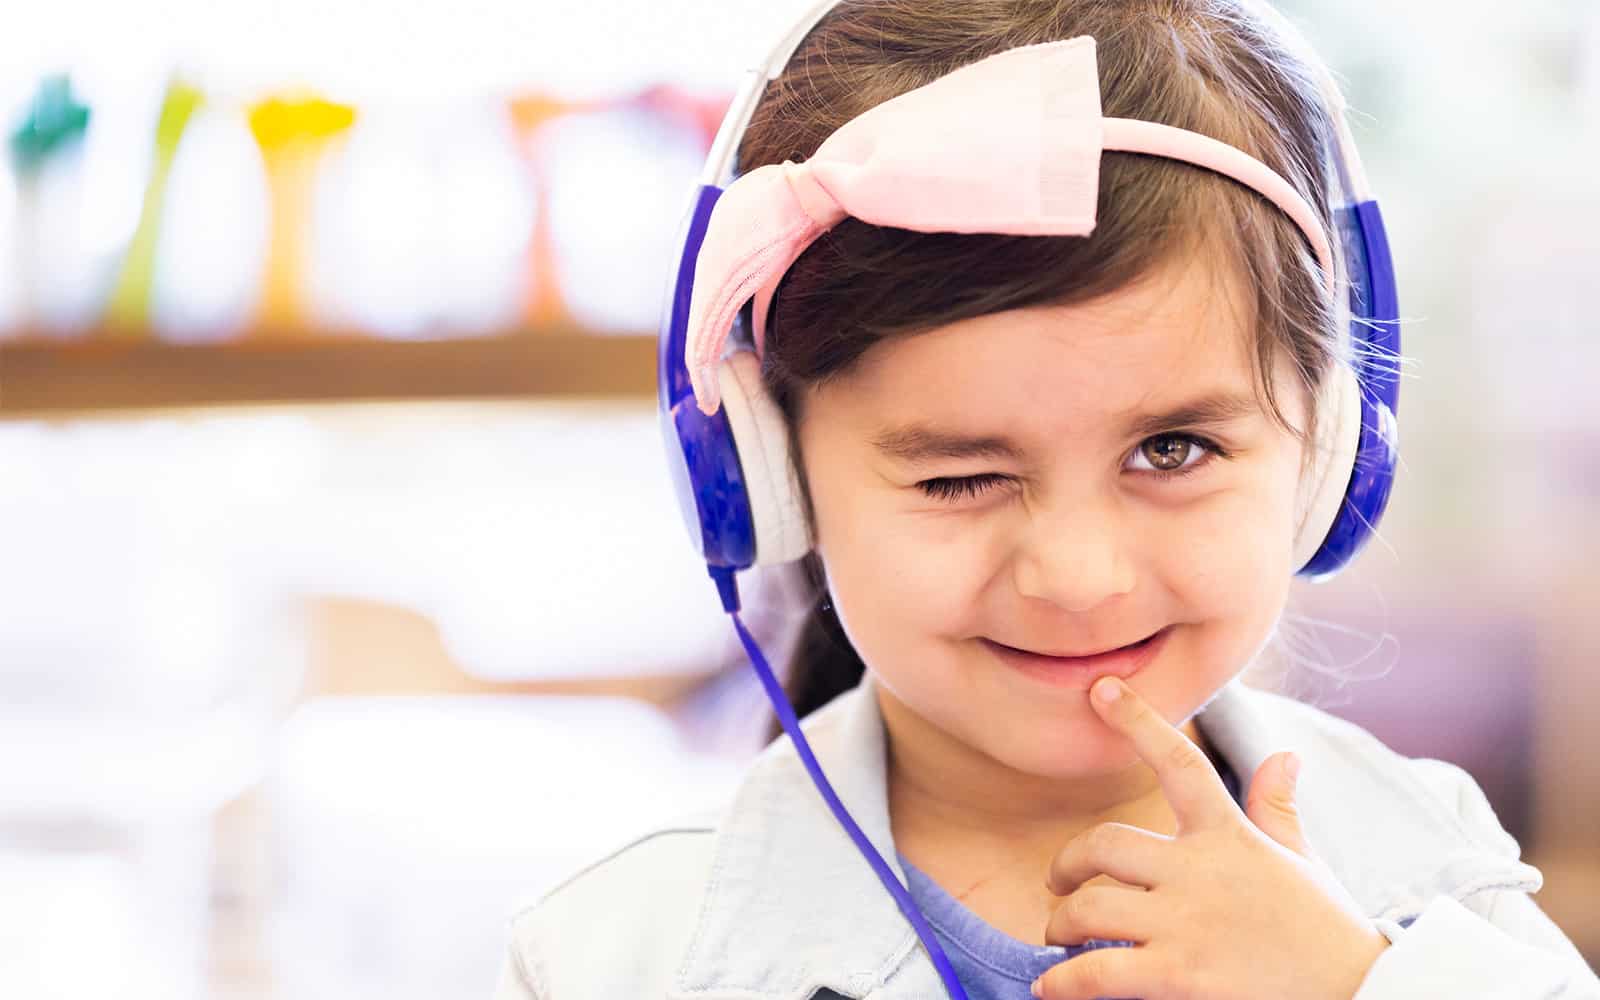 Child wearing headset winking at the camera